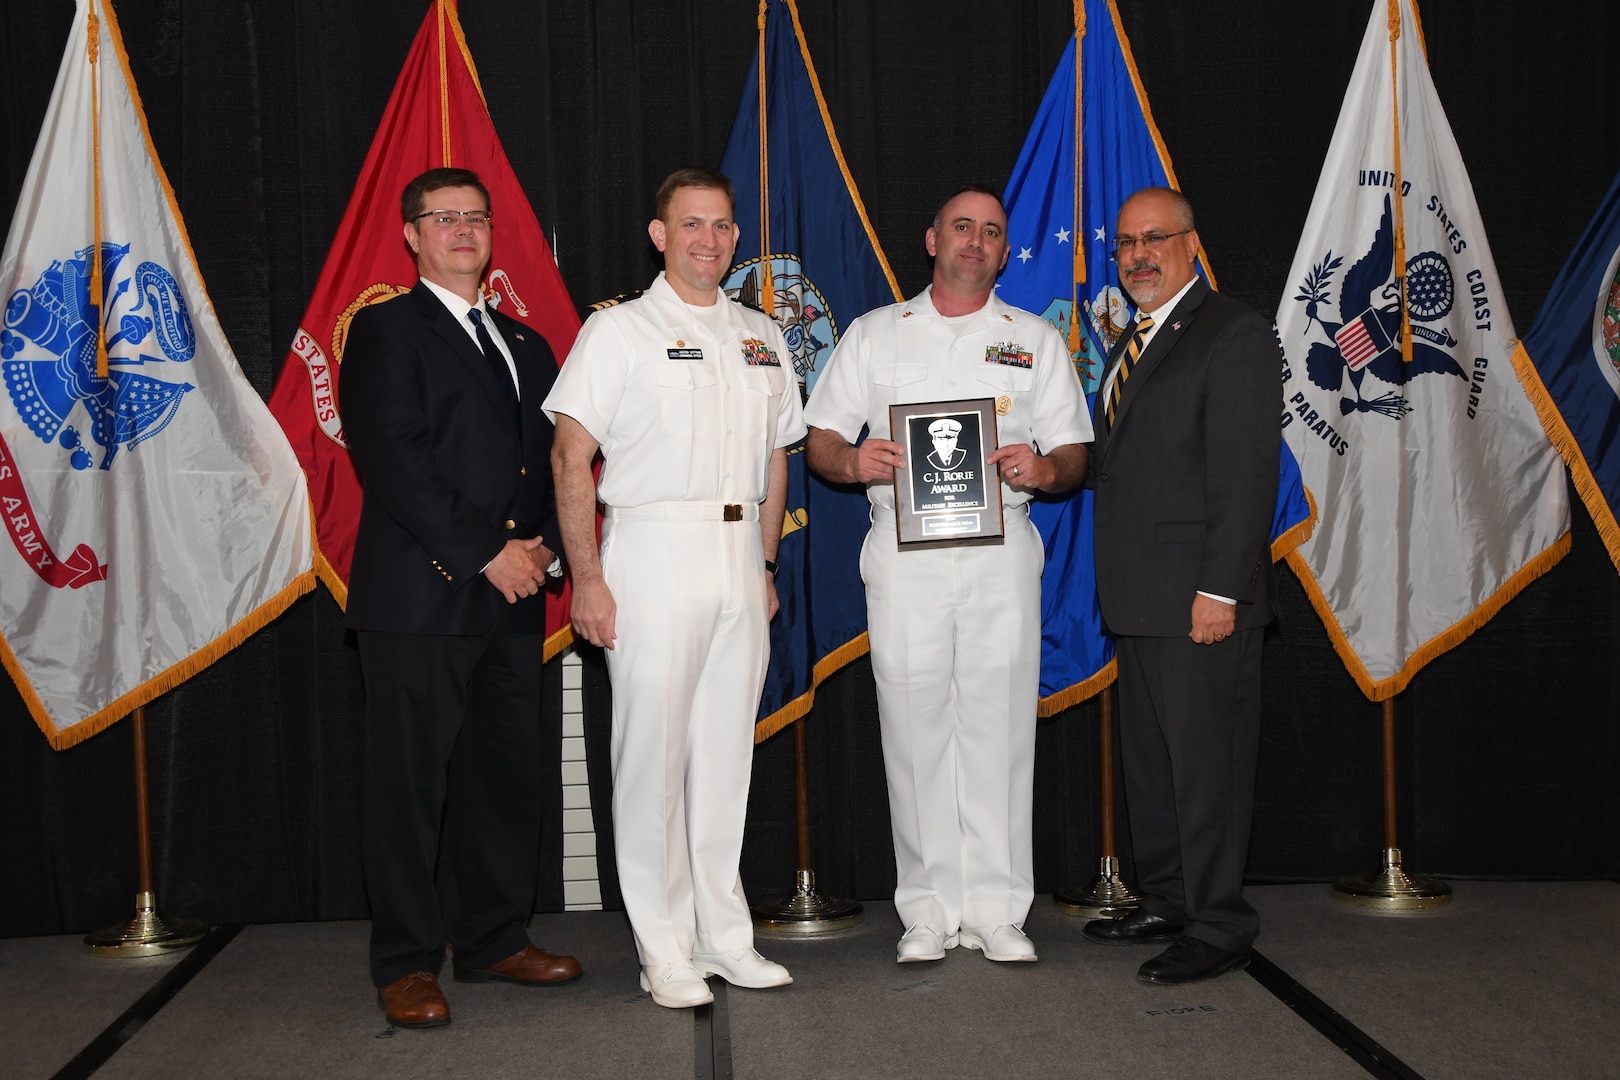 IMAGE: Master Chief Fire Controlman Nathaniel Melvin is presented the C.J. Rorie Award at Naval Surface Warfare Center Dahlgren Division's annual awards ceremony, Apr. 26 at the Fredericksburg Expo and Conference Center.

The C.J. Rorie Award was established to recognize military personnel assigned to NSWCDD whose excellence in the performance of their duties contributed significantly to the effectiveness of the Division's military operation.